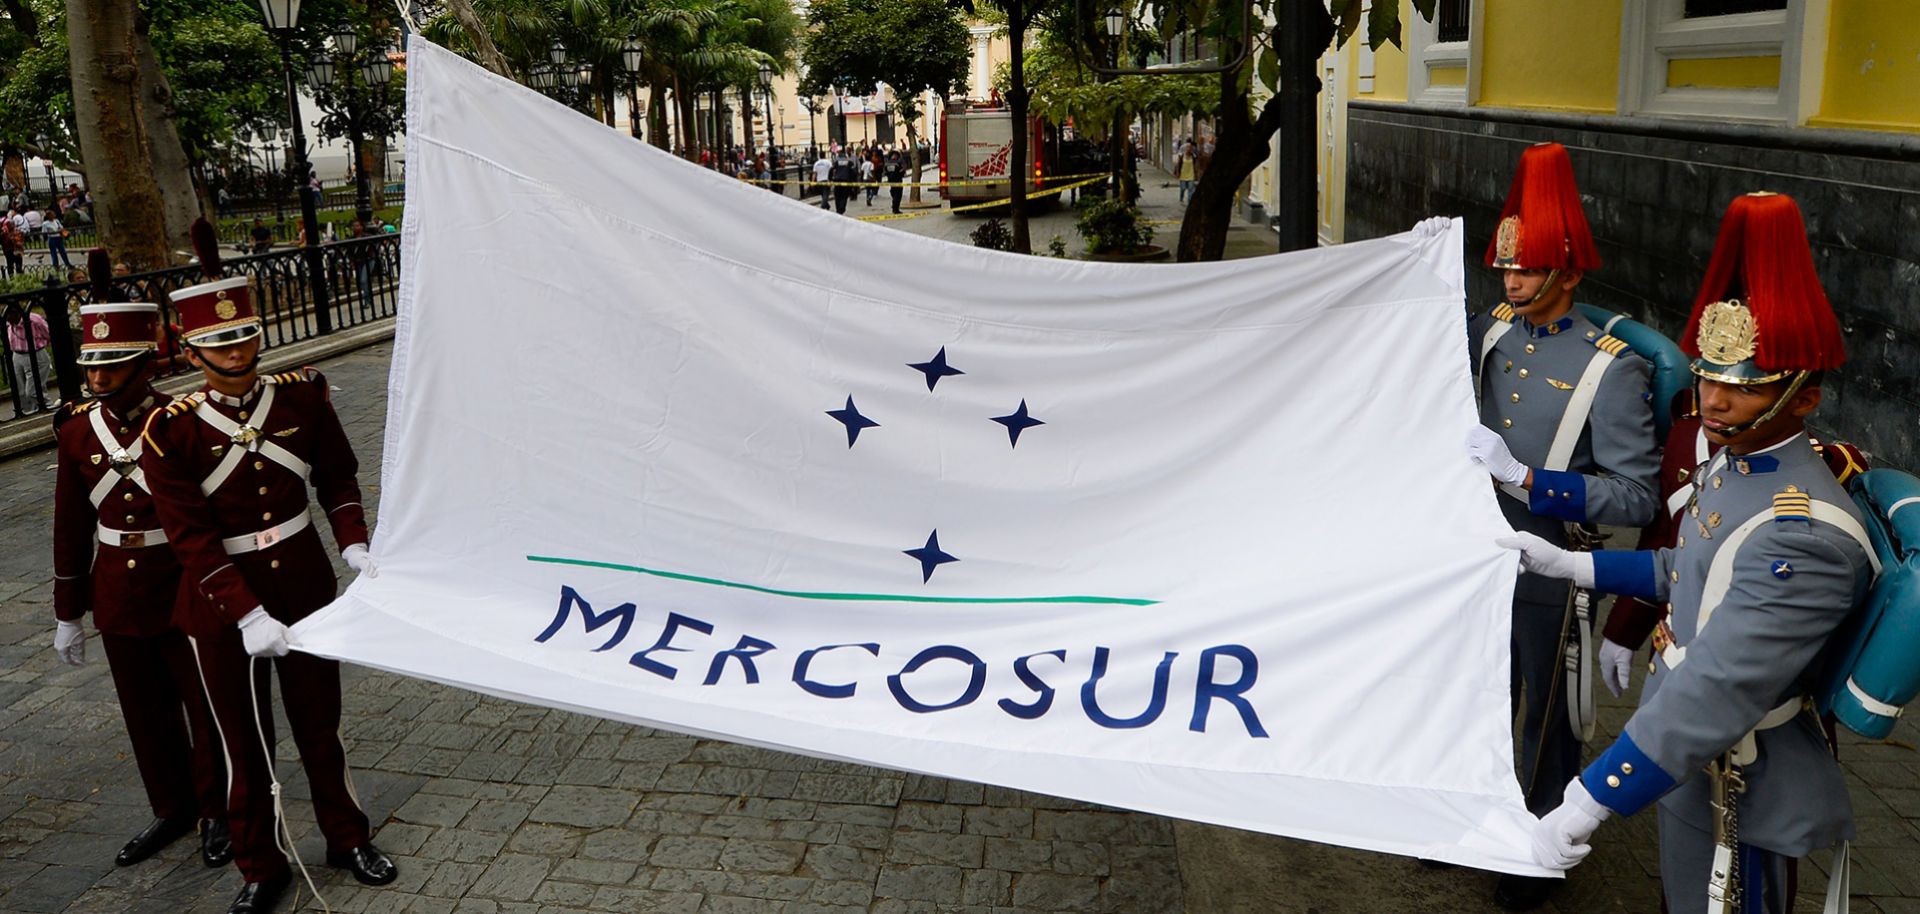 Personnel raise the Mercosur flag in Caracas on Aug. 5. Expelling Venezuela from the trade bloc may not be as easy as its opponents suggest.